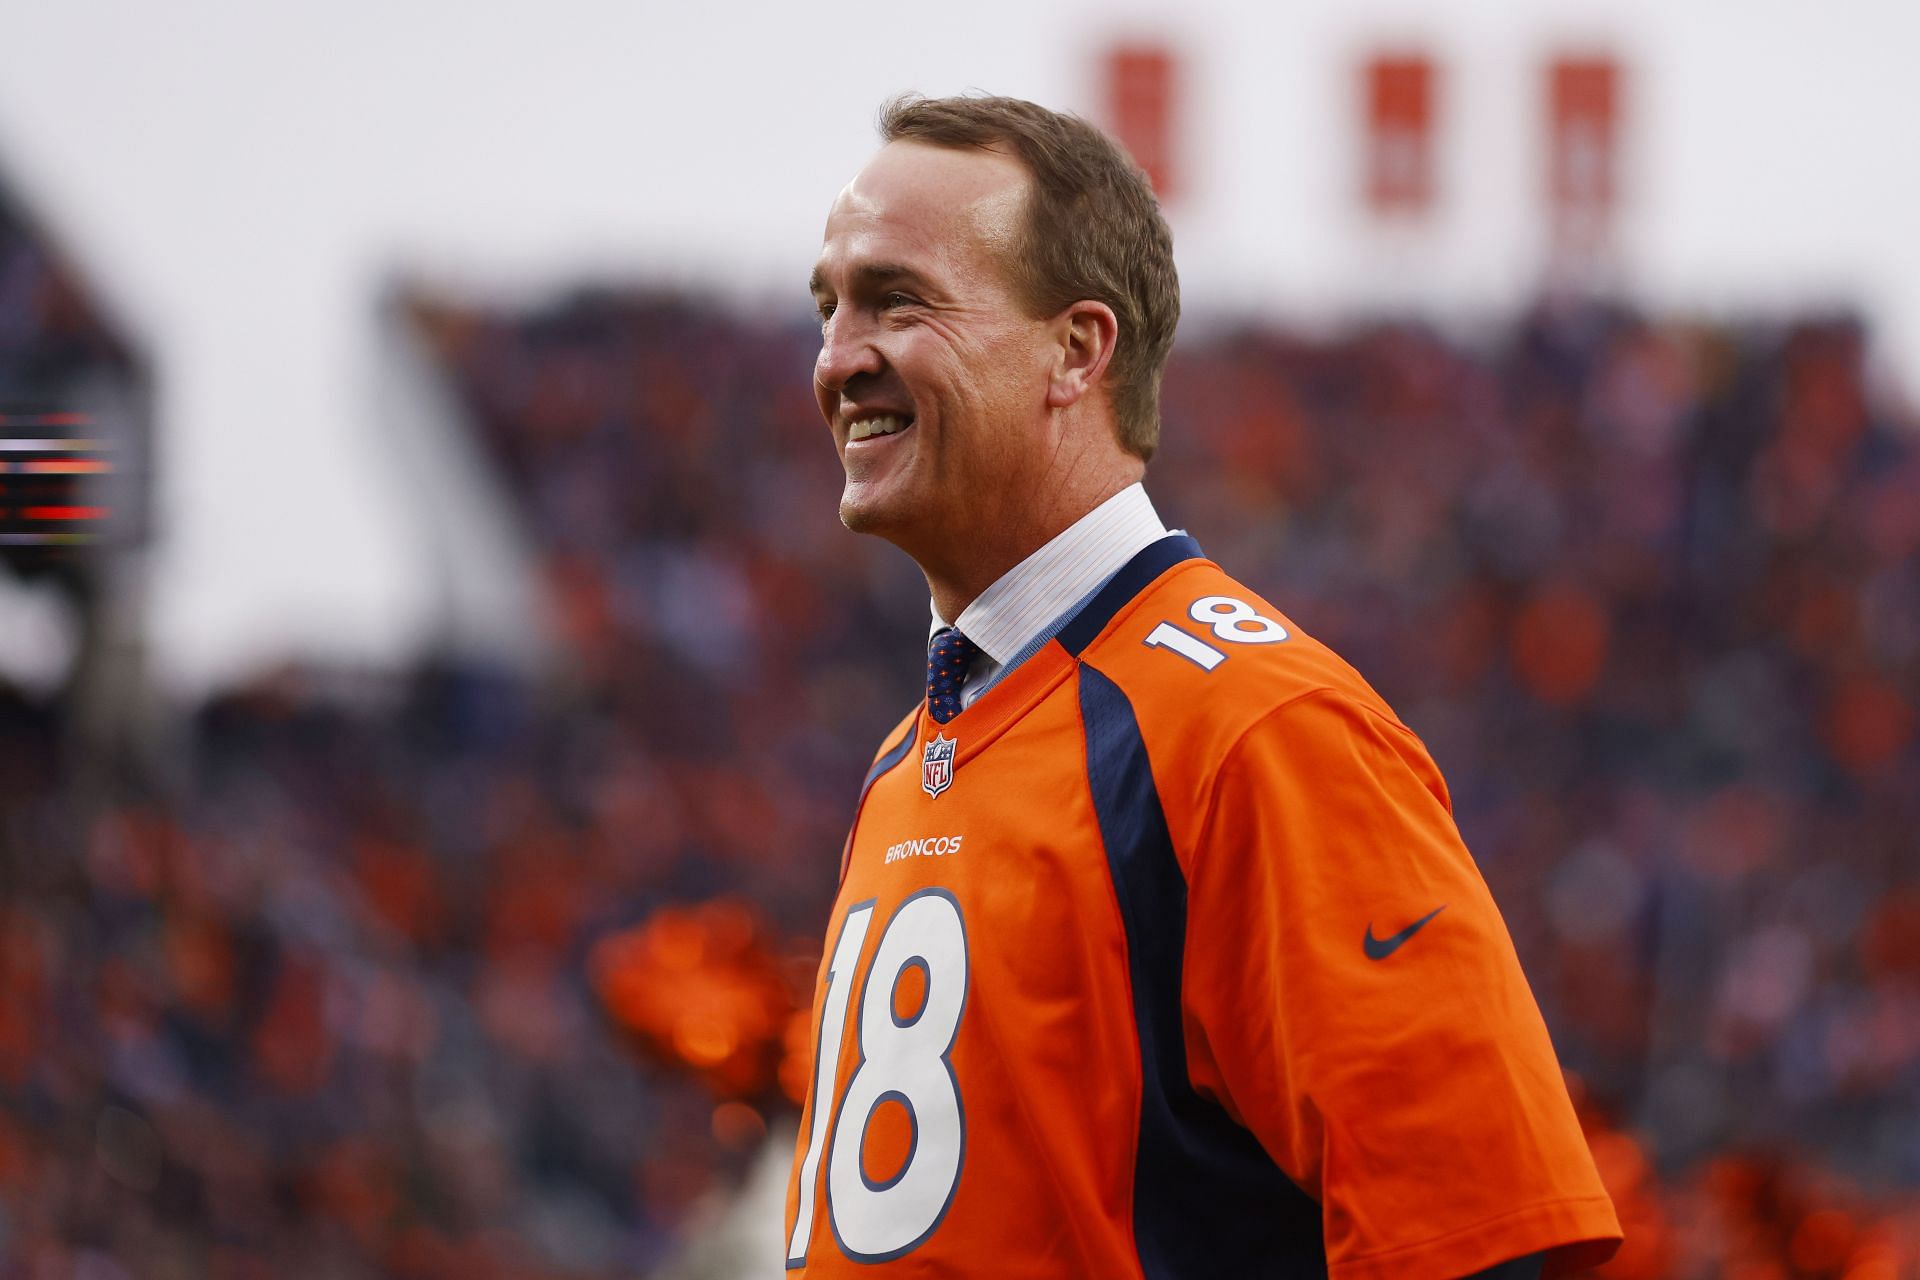 Even if Denver wins today, Manning can't get more popular